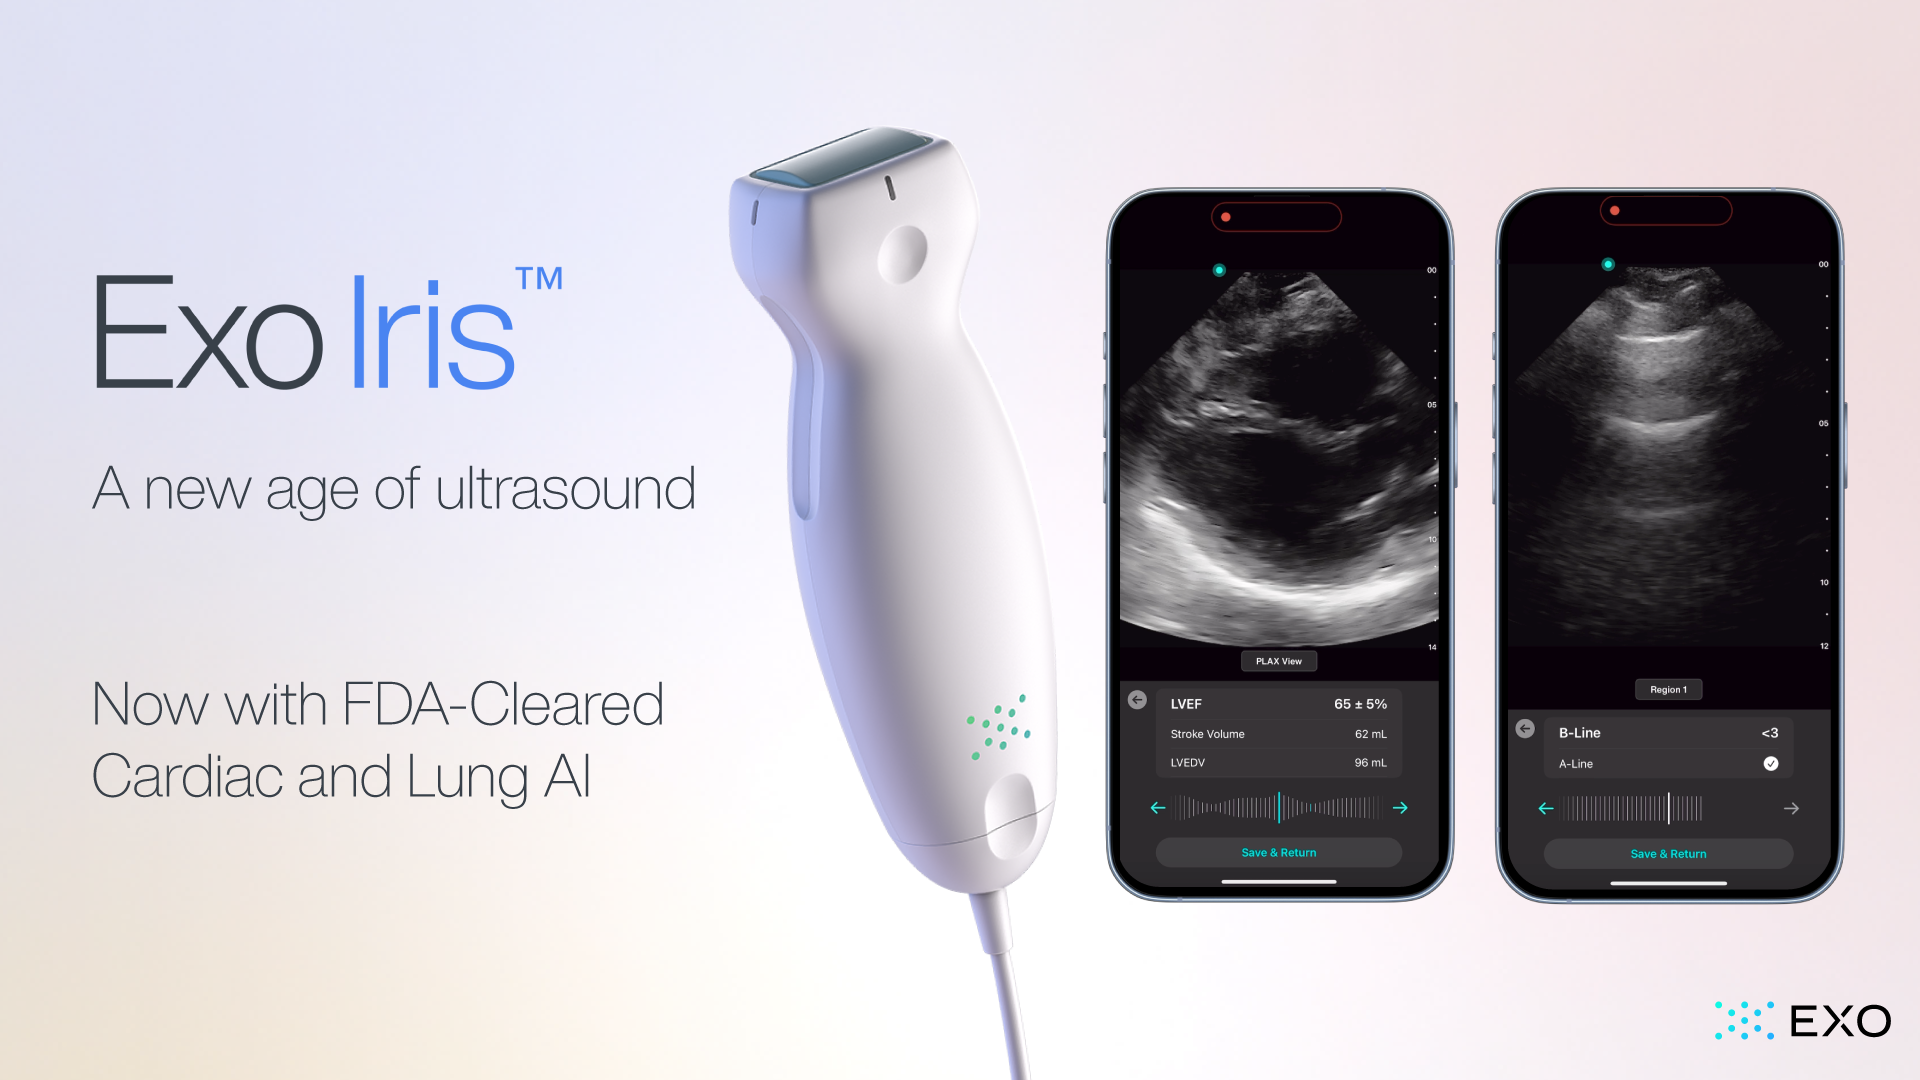 Exo® (pronounced “echo”), a medical imaging software and devices company, today announced its FDA-cleared cardiac and lung artificial intelligence (AI) applications are now available on Exo Iris™, Exo’s high-performance handheld ultrasound device. 